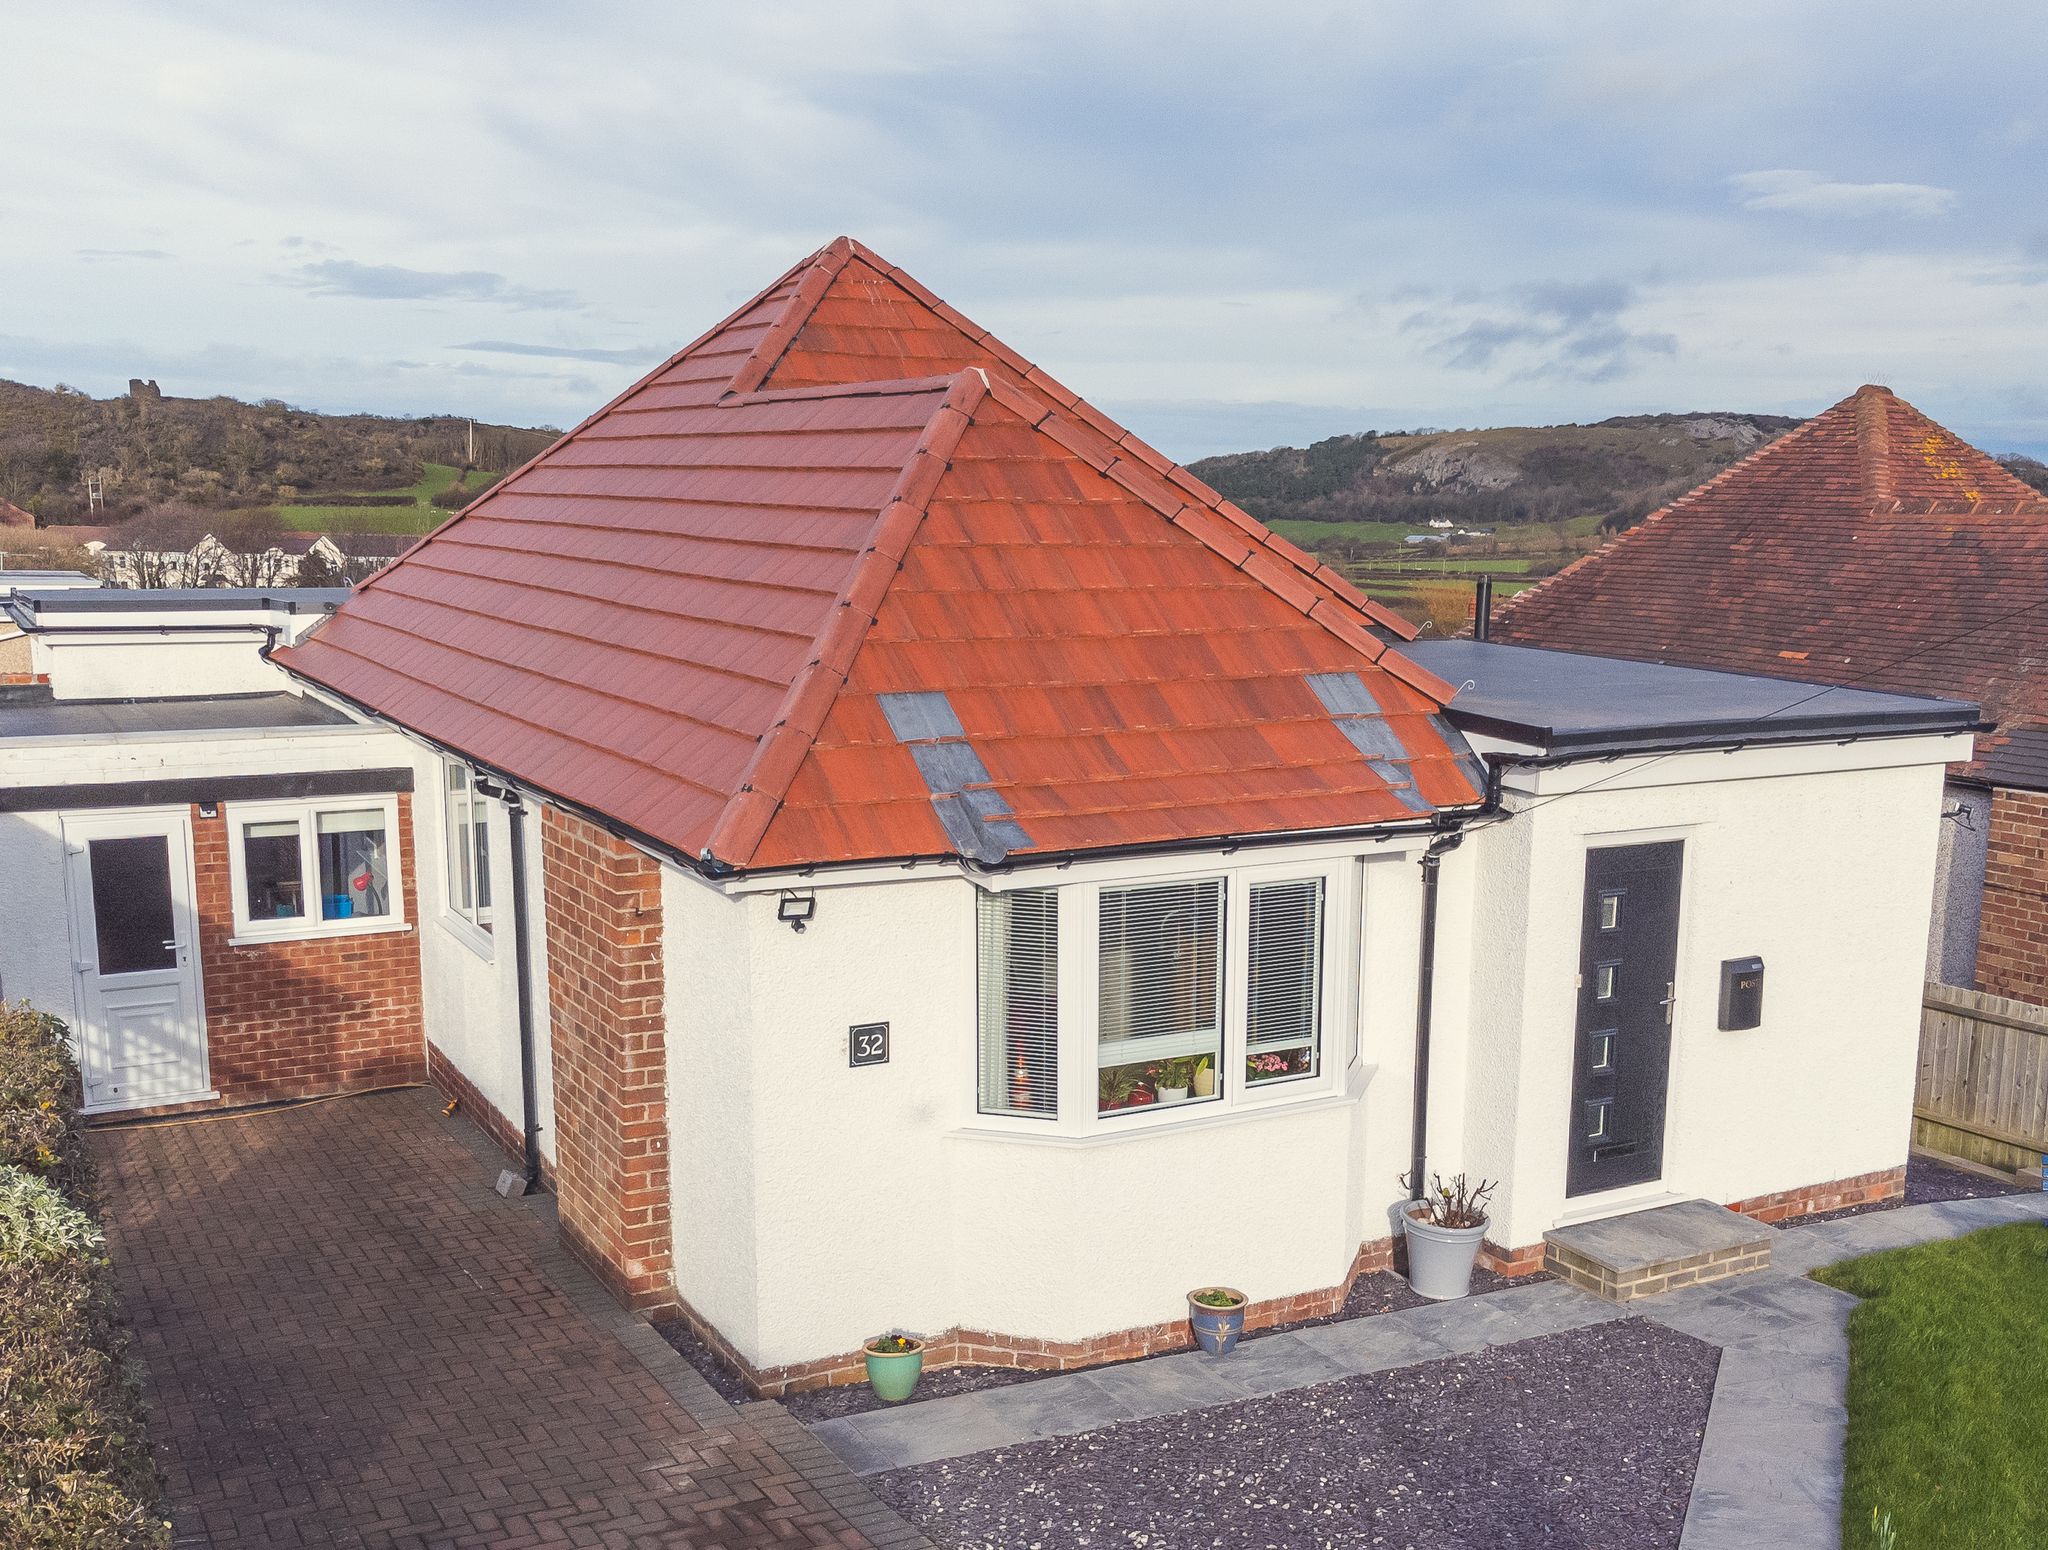 Tile Roof Contractors Amlwch, LL68 - DD Roofing